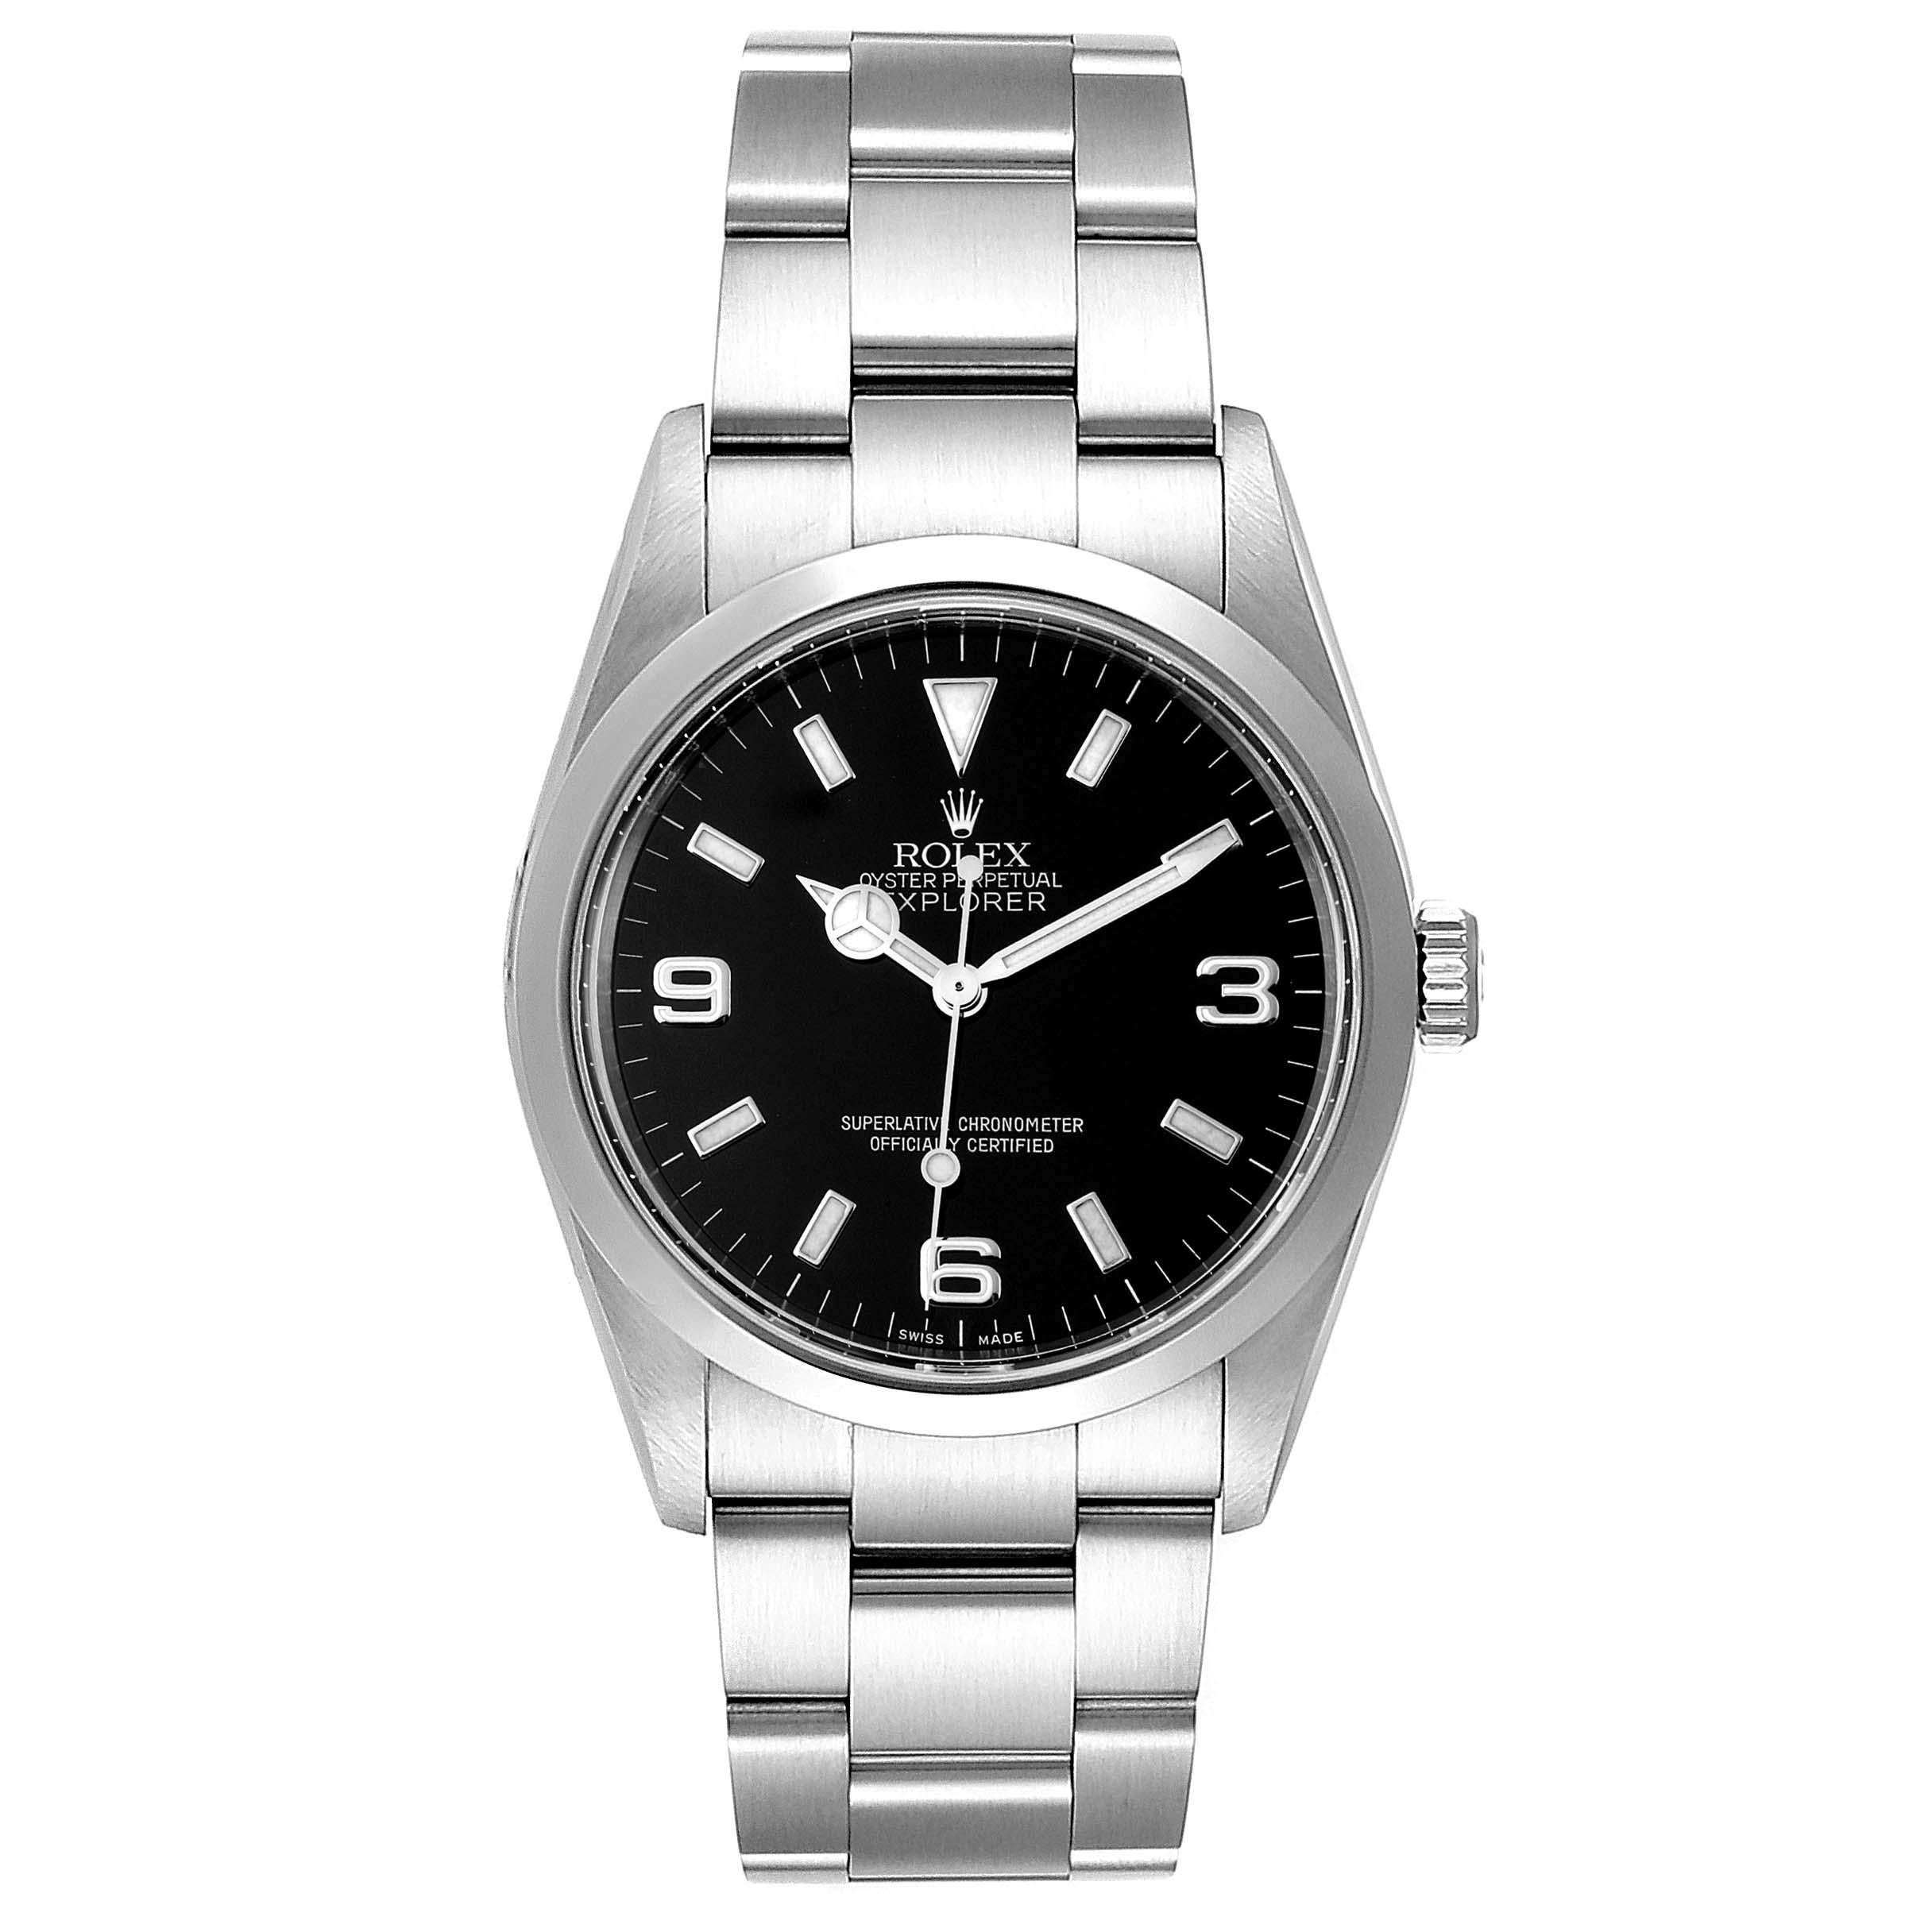 Rolex Explorer I Black Dial Stainless Steel Mens Watch 114270 Box. Officially certified chronometer self-winding movement. Stainless steel case 36.0 mm in diameter. Rolex logo on a crown. Stainless steel smooth domed bezel. Scratch resistant